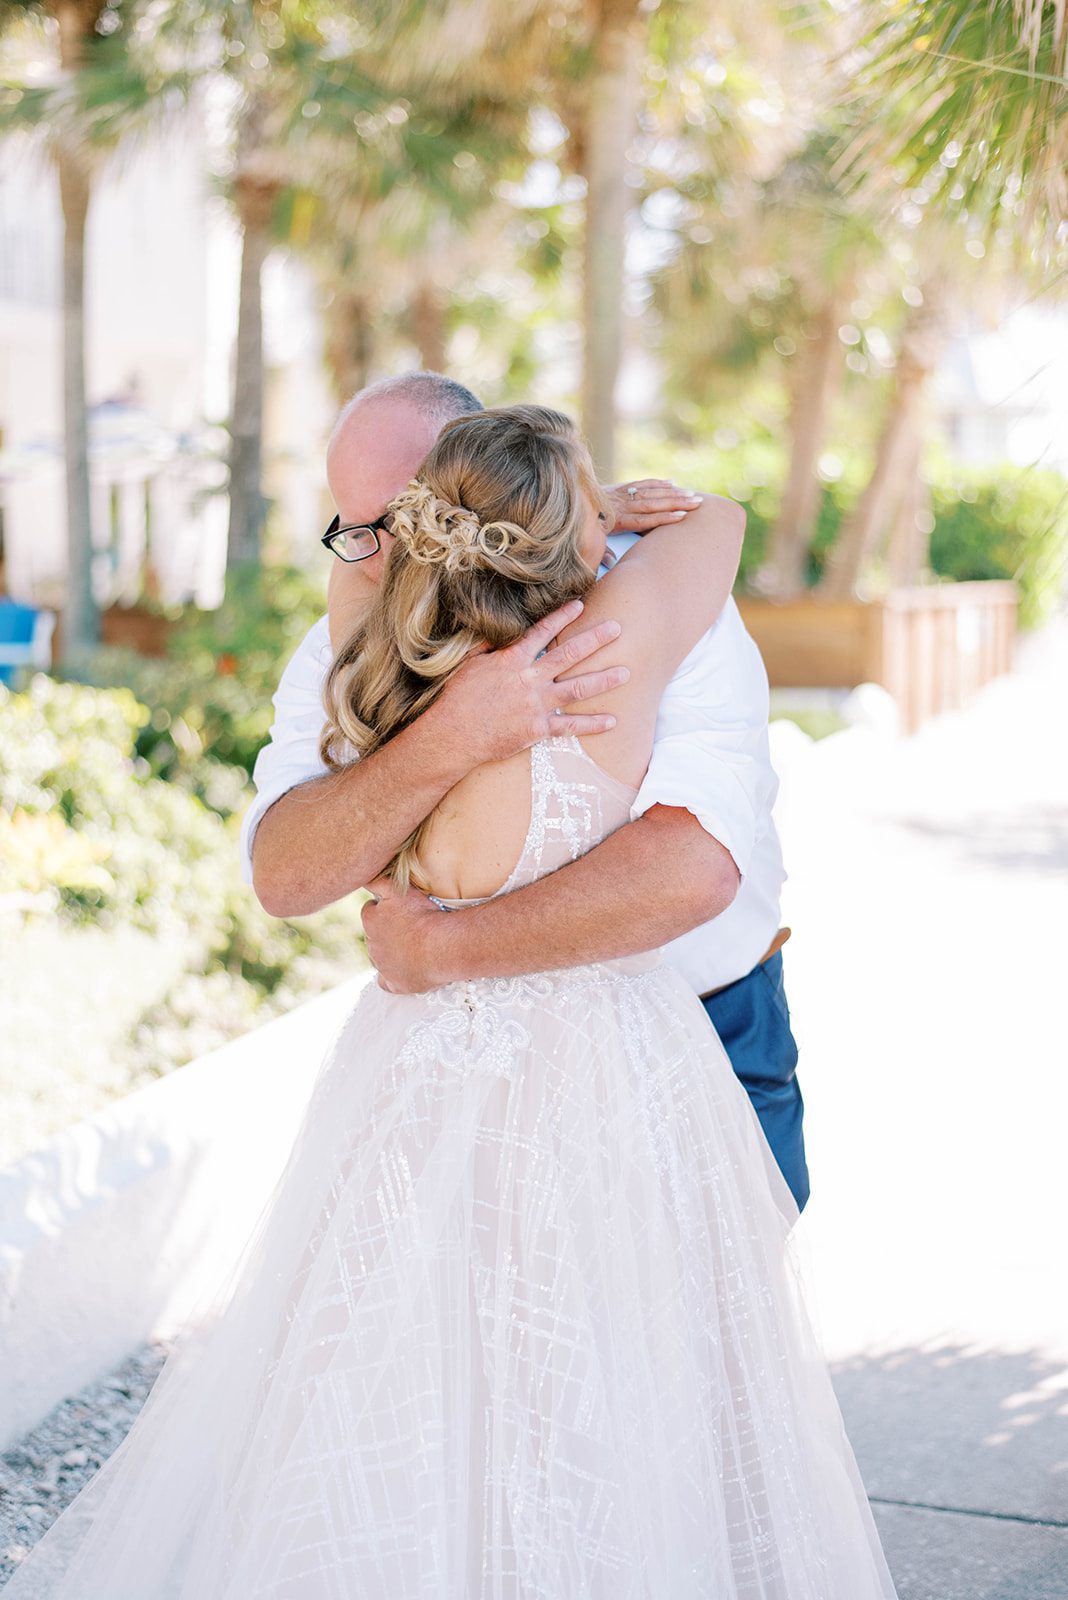 Tampa bride hugs her groom during their first look together during their boho wedding in Tampa Florida